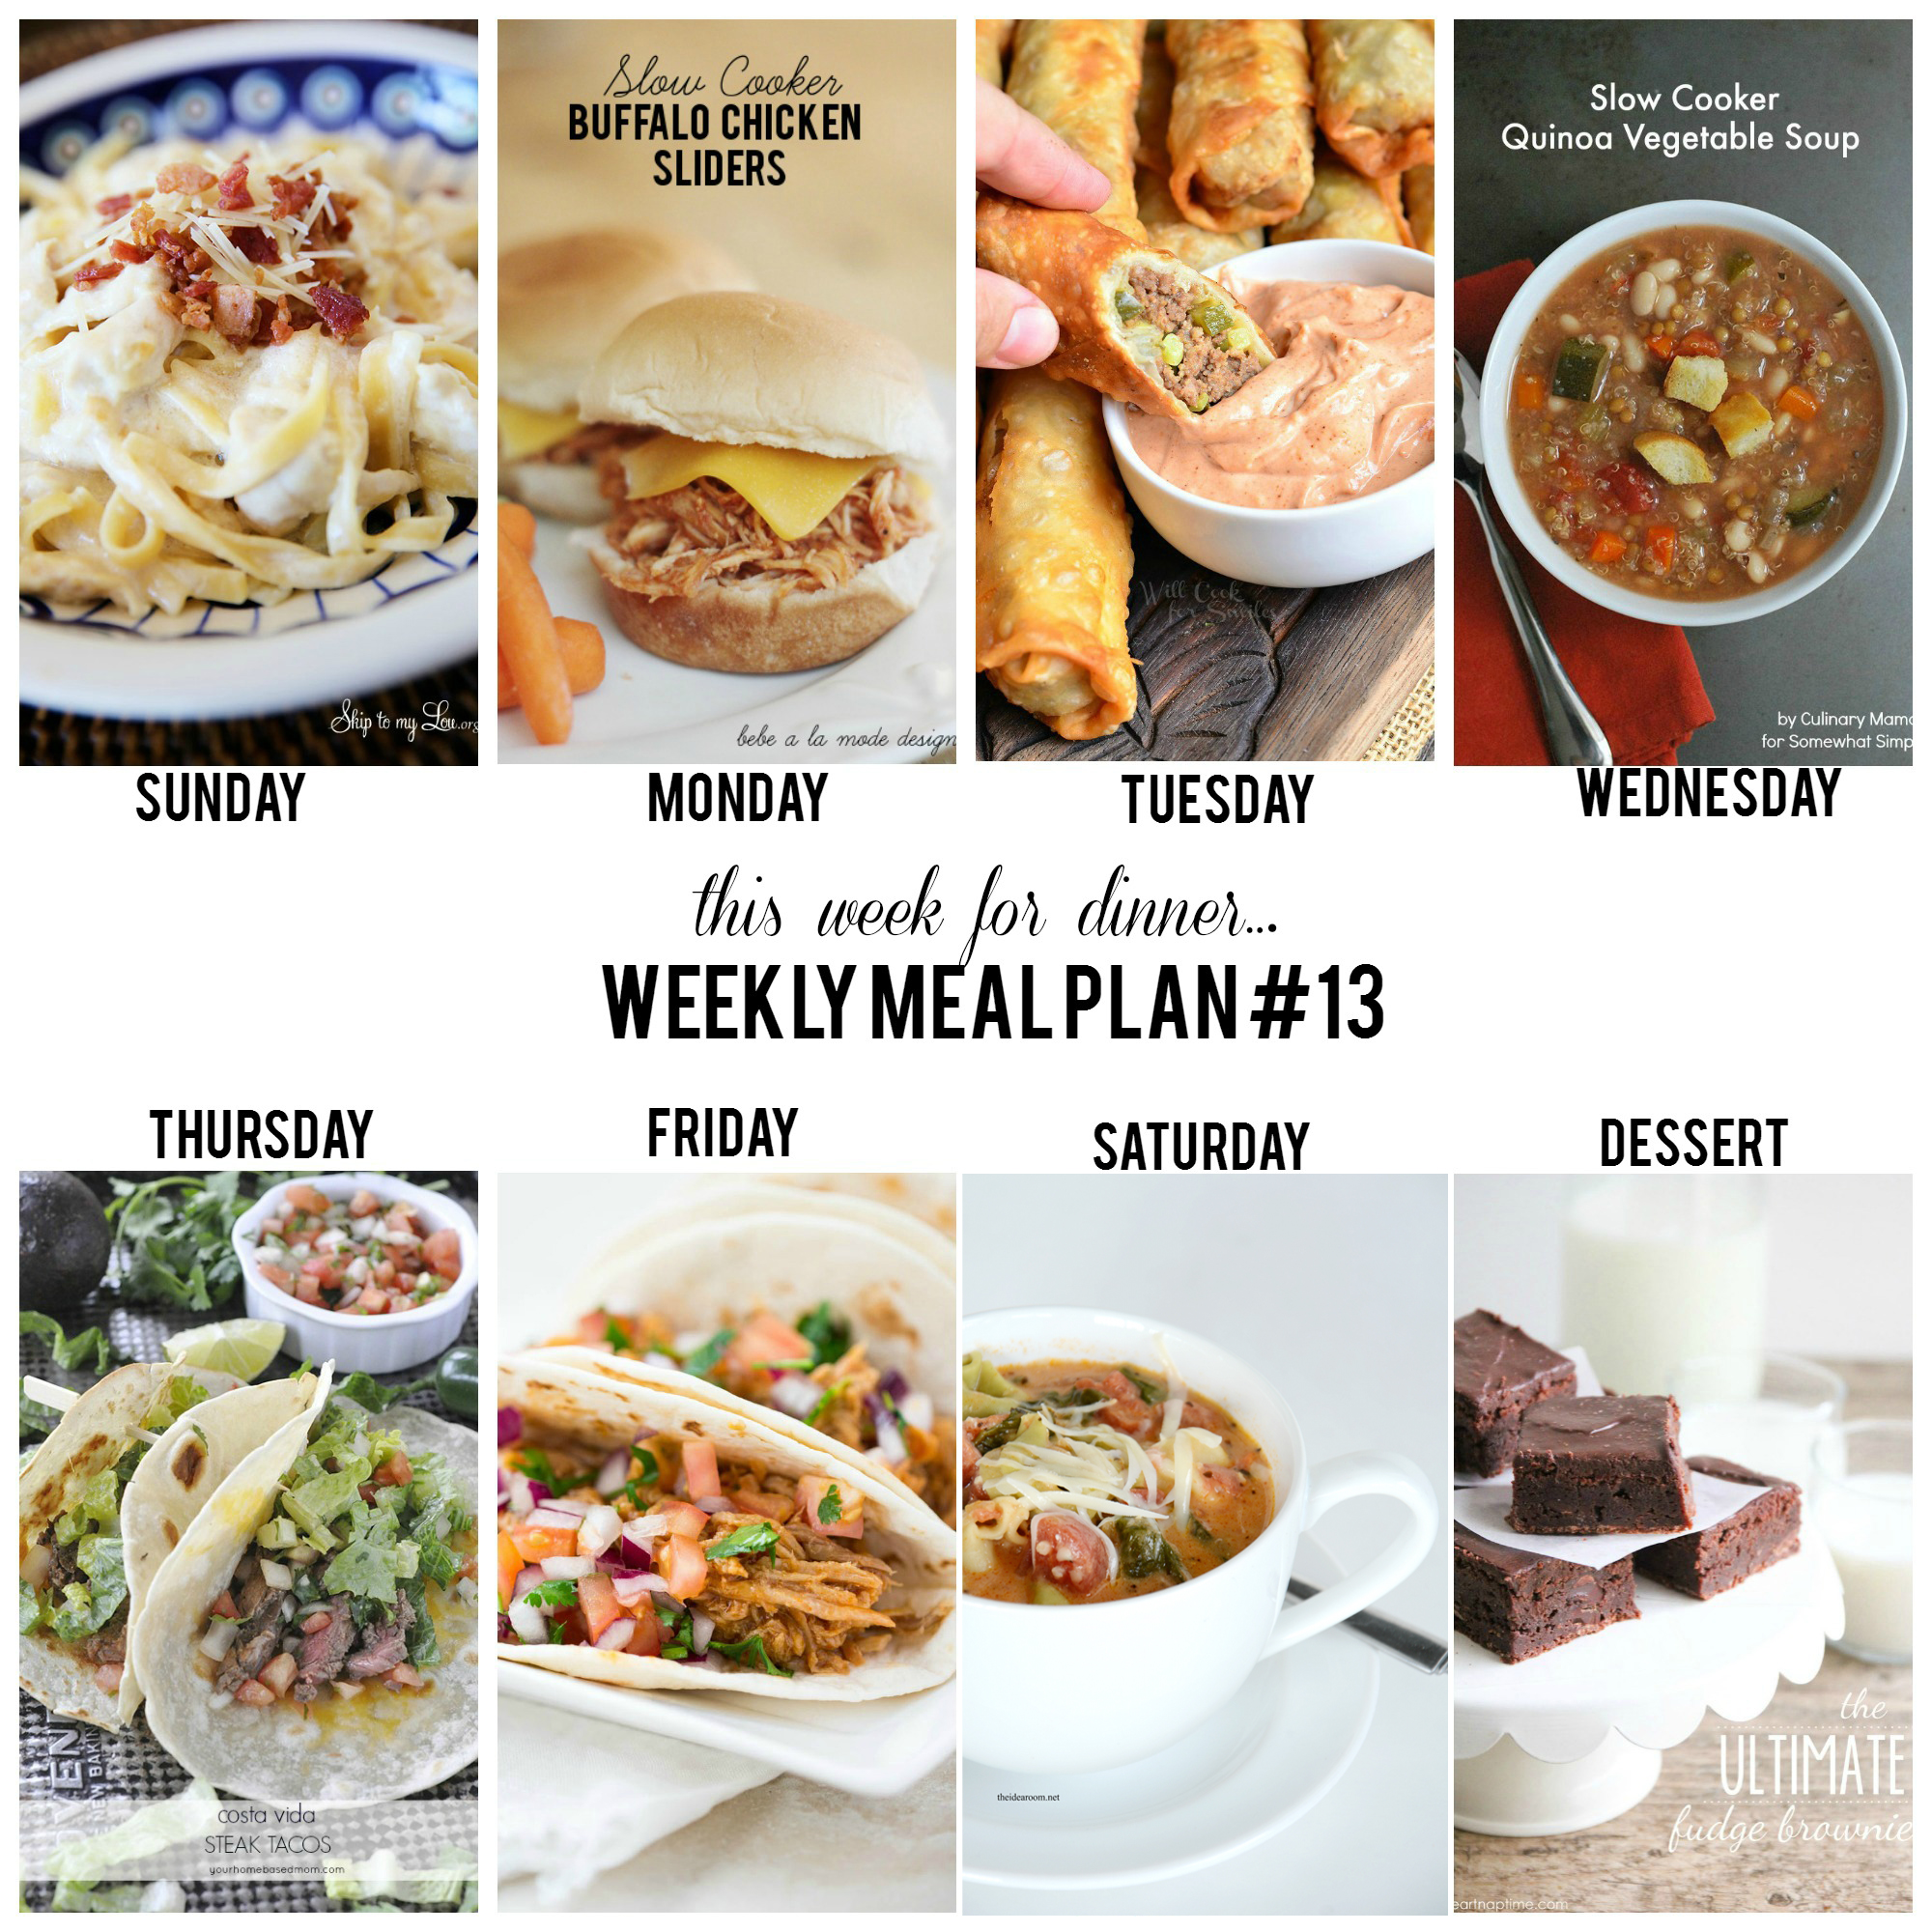 Weekly Meal Plan 13 - Delicious recipes for each day of the week!